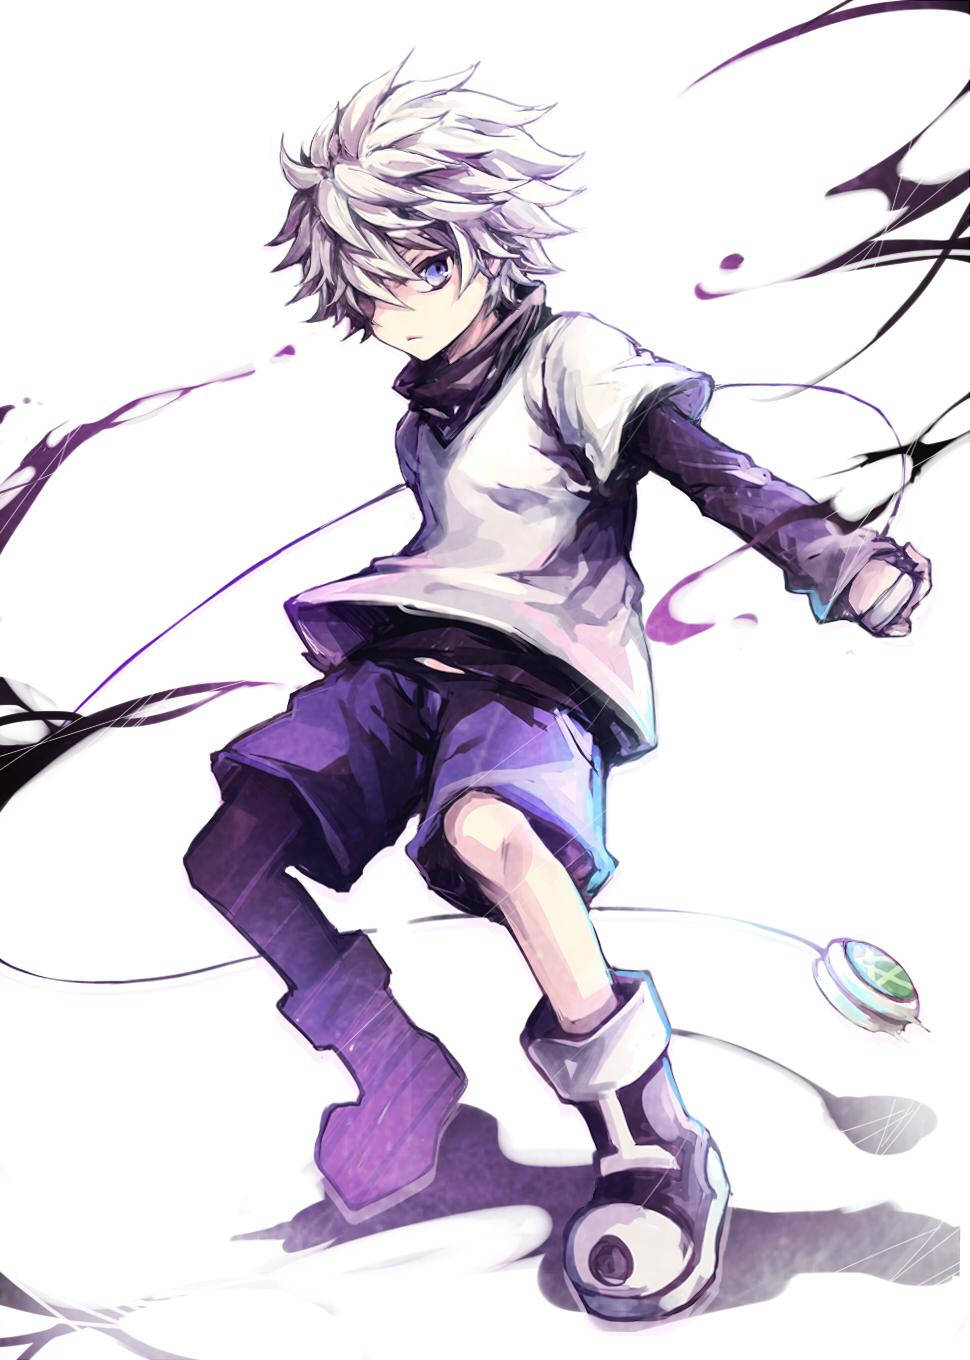 "Express your inner strength with Cool Killua! Wallpaper